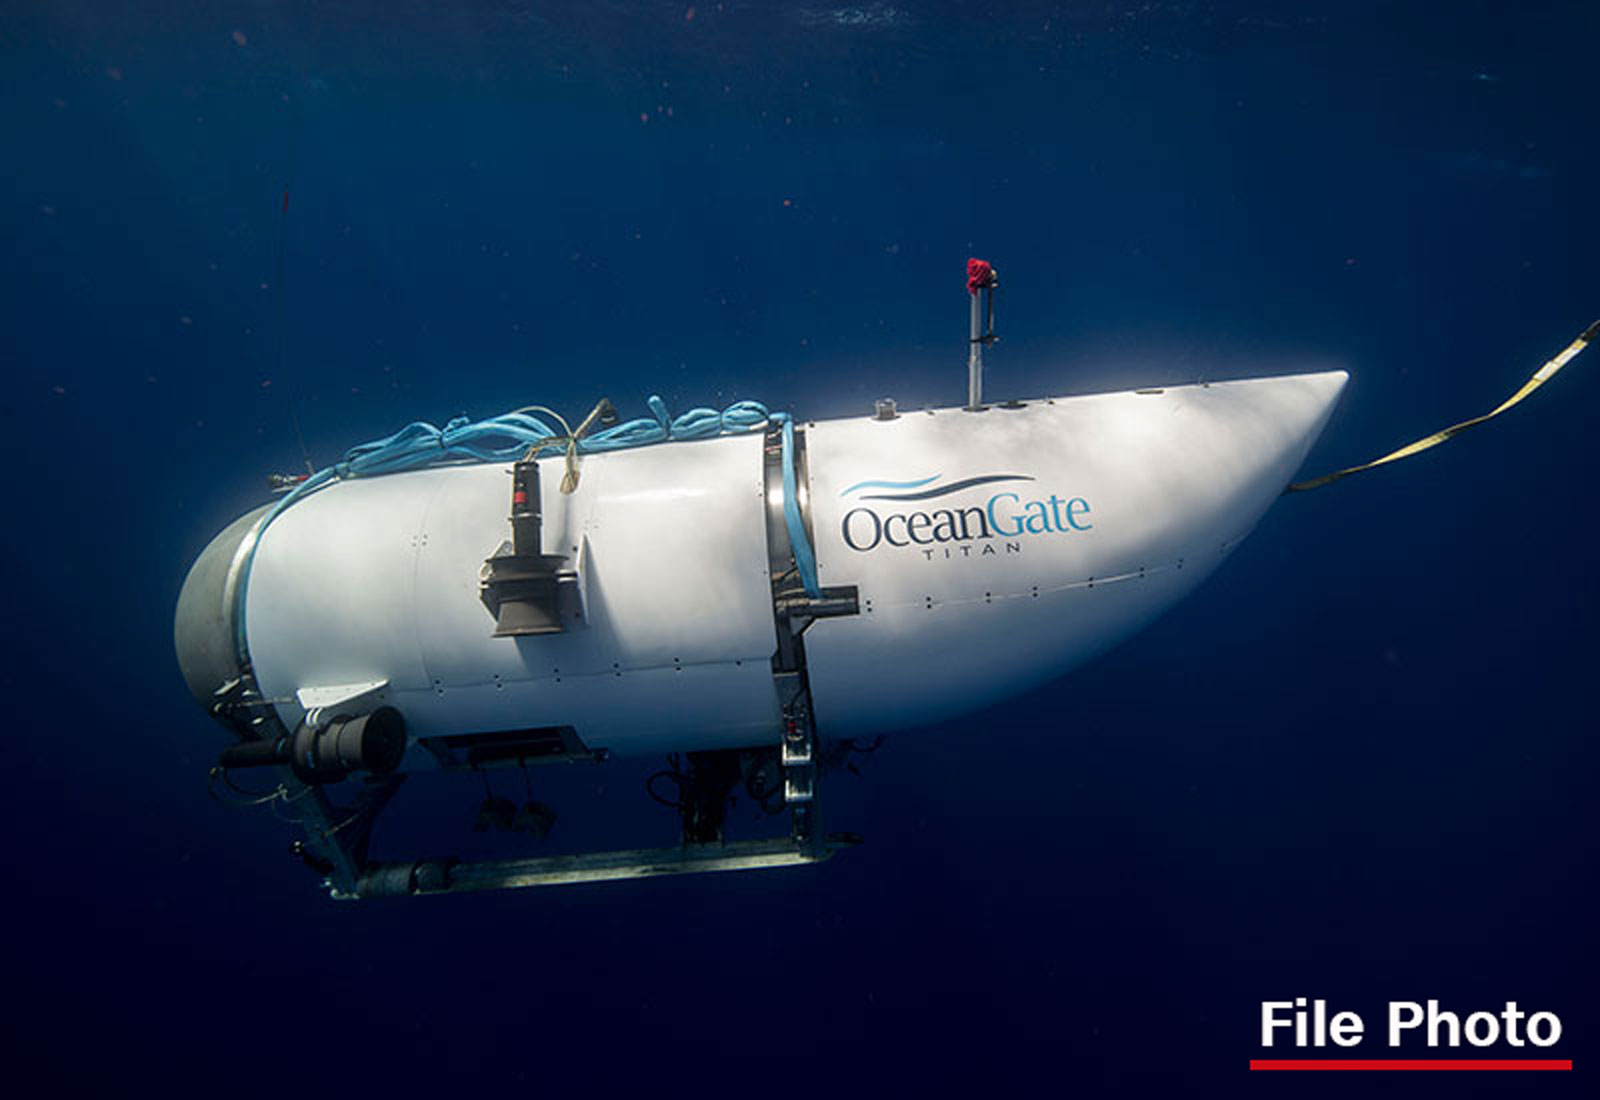 An undated photograph of OceanGate's Titan submersible.